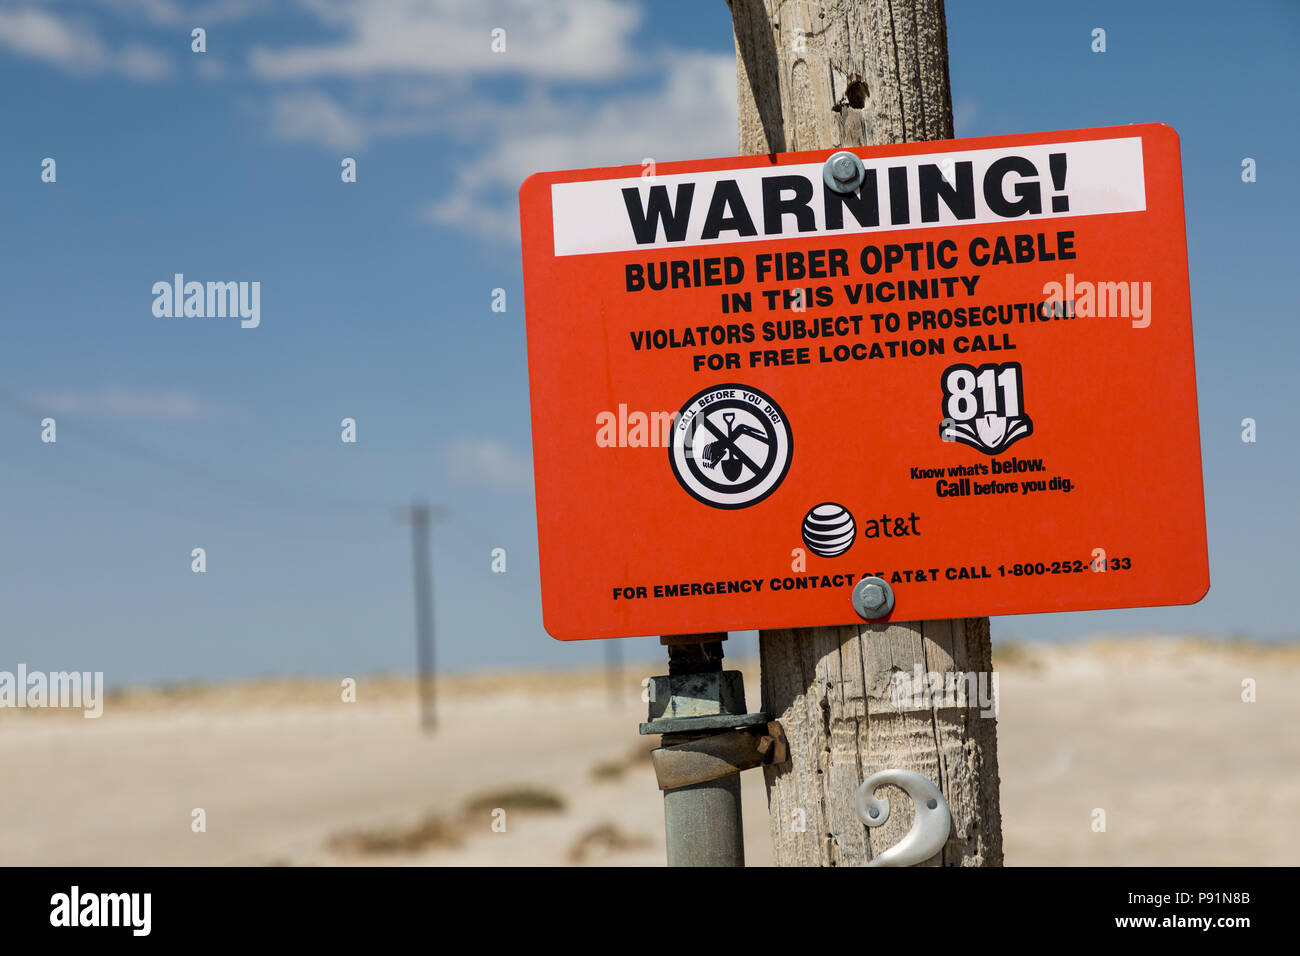 Warning sign for buried fiber optic cable in desert, New Mexico, USA Stock Photo